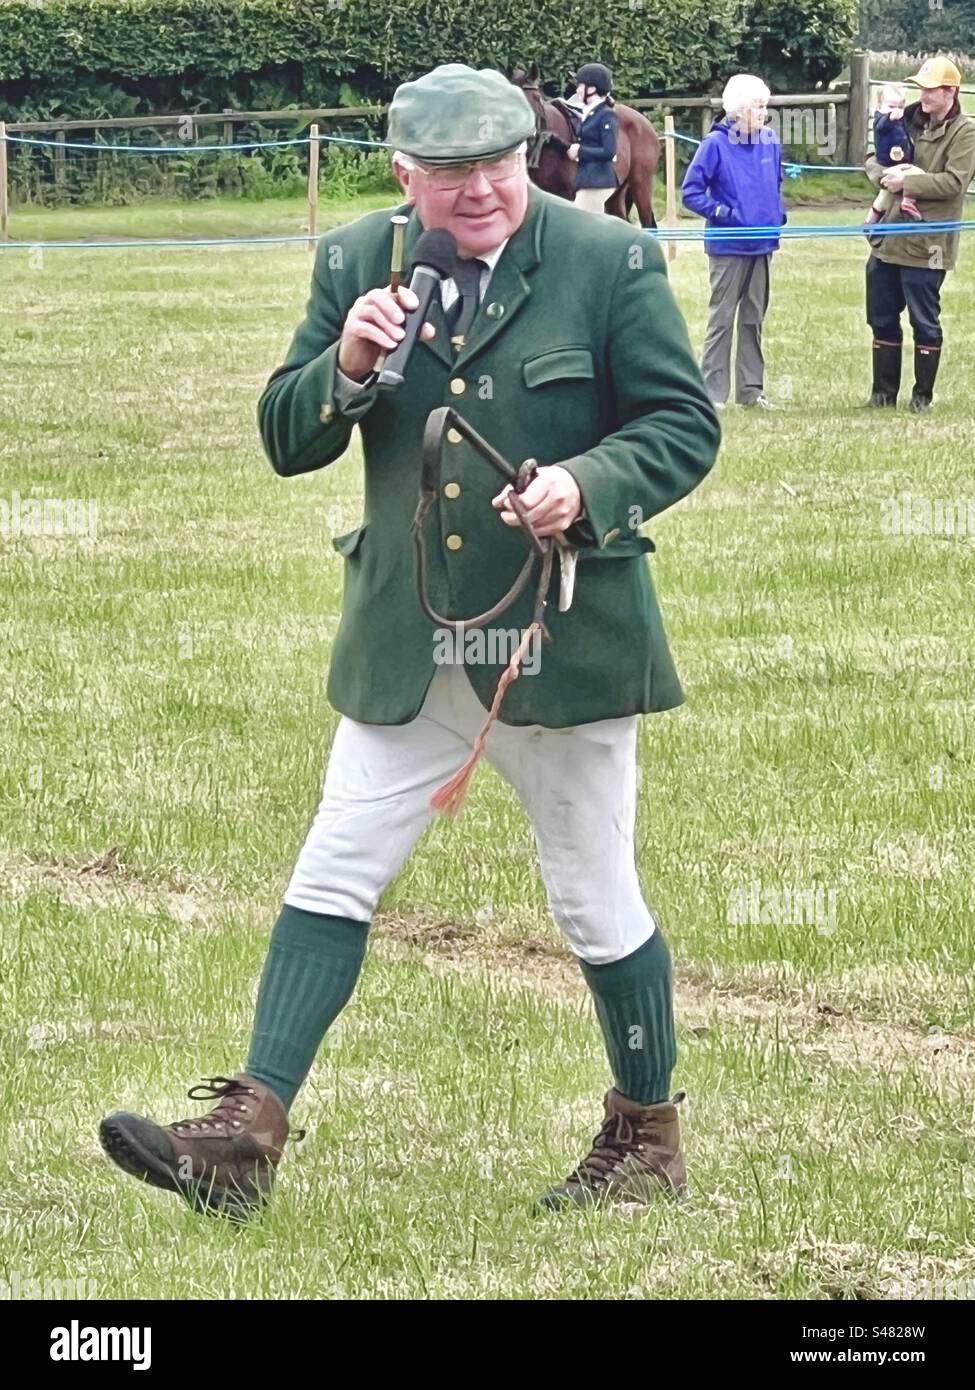 Elderly commentator with microphone at Countryside show Stock Photo